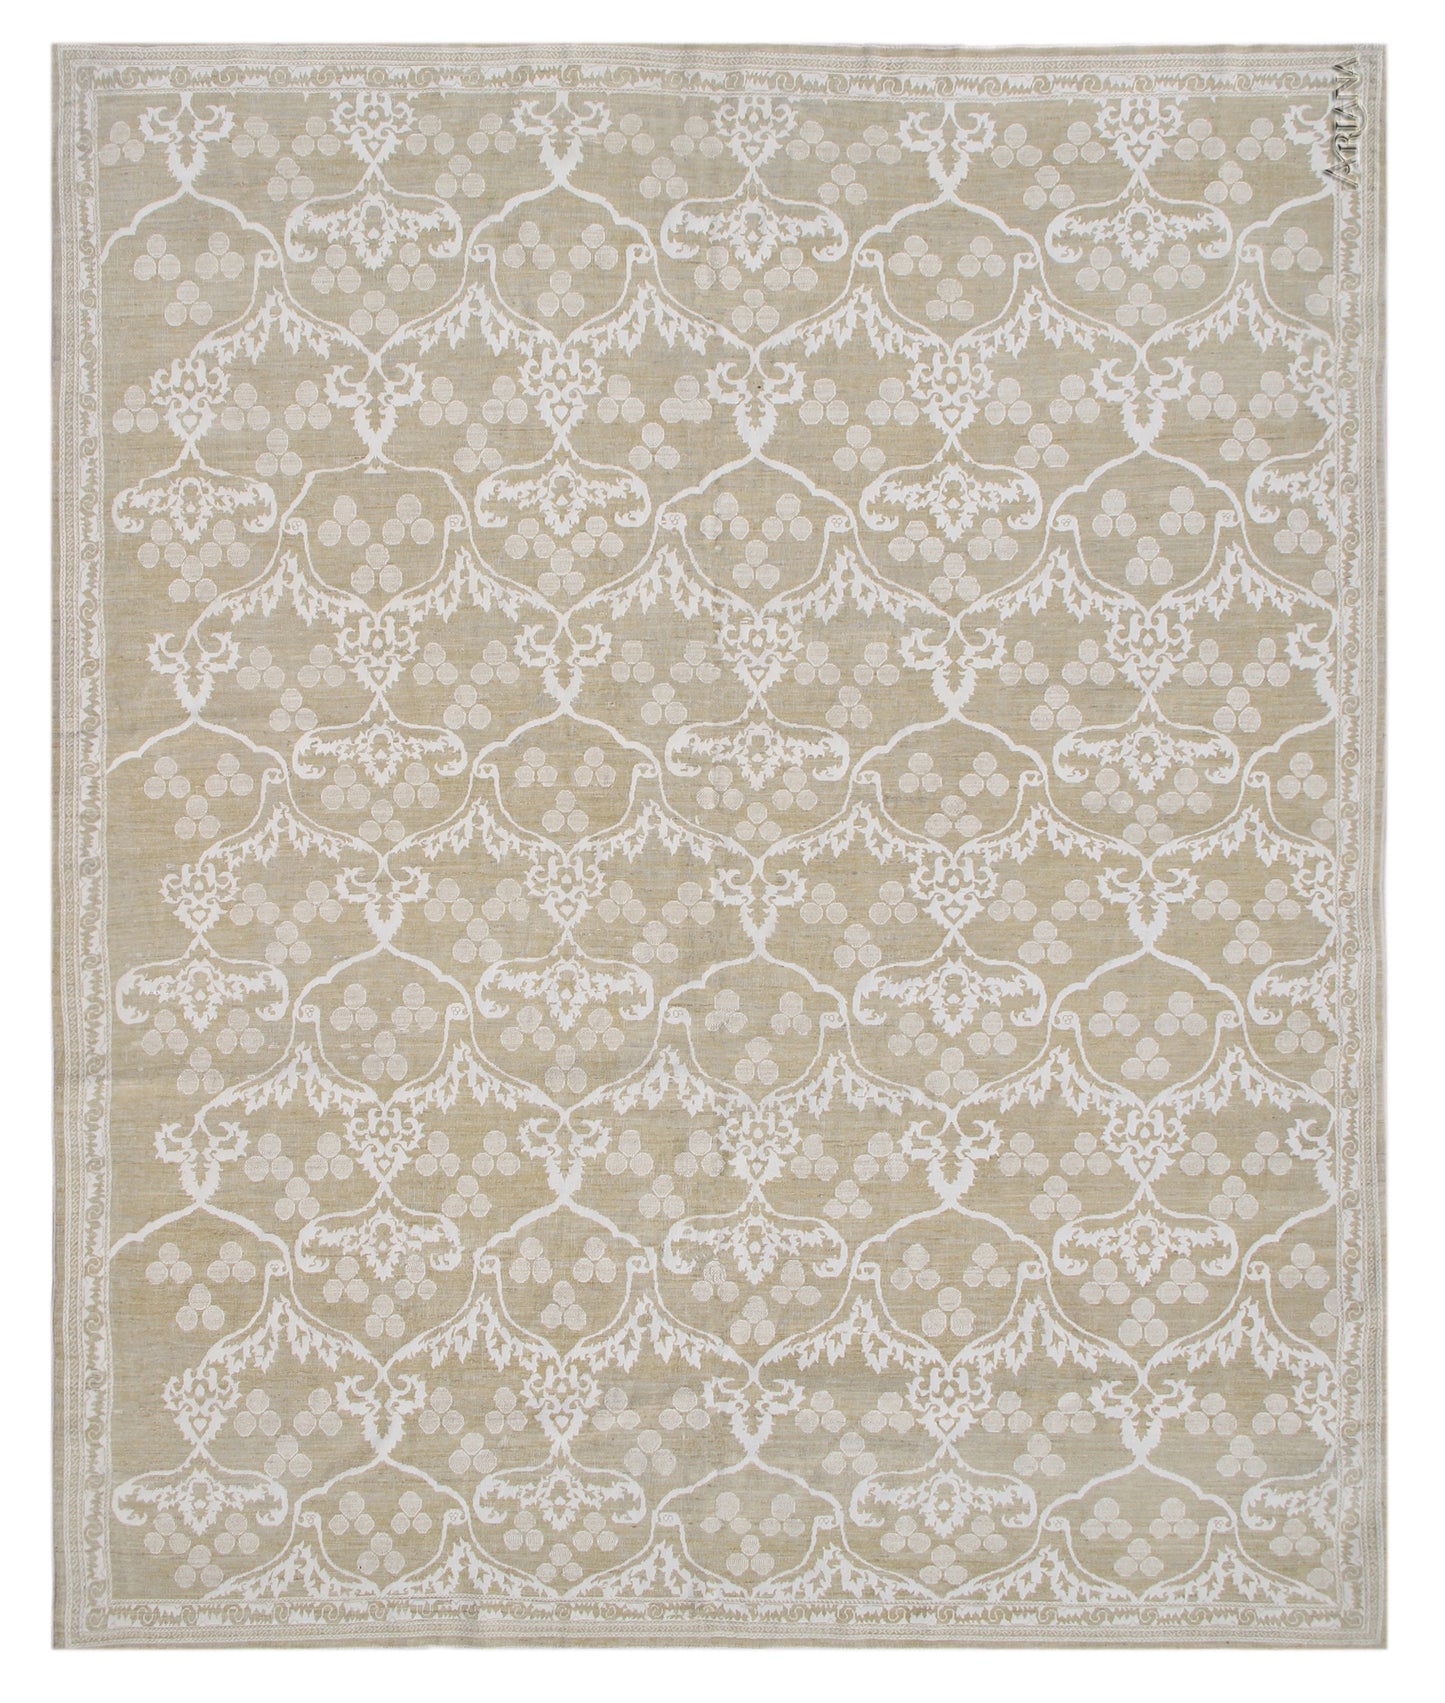 9.08 x  7.11 Very Finely Knotted Silk and Wool Ottoman Design Ariana Transitional Area Rug